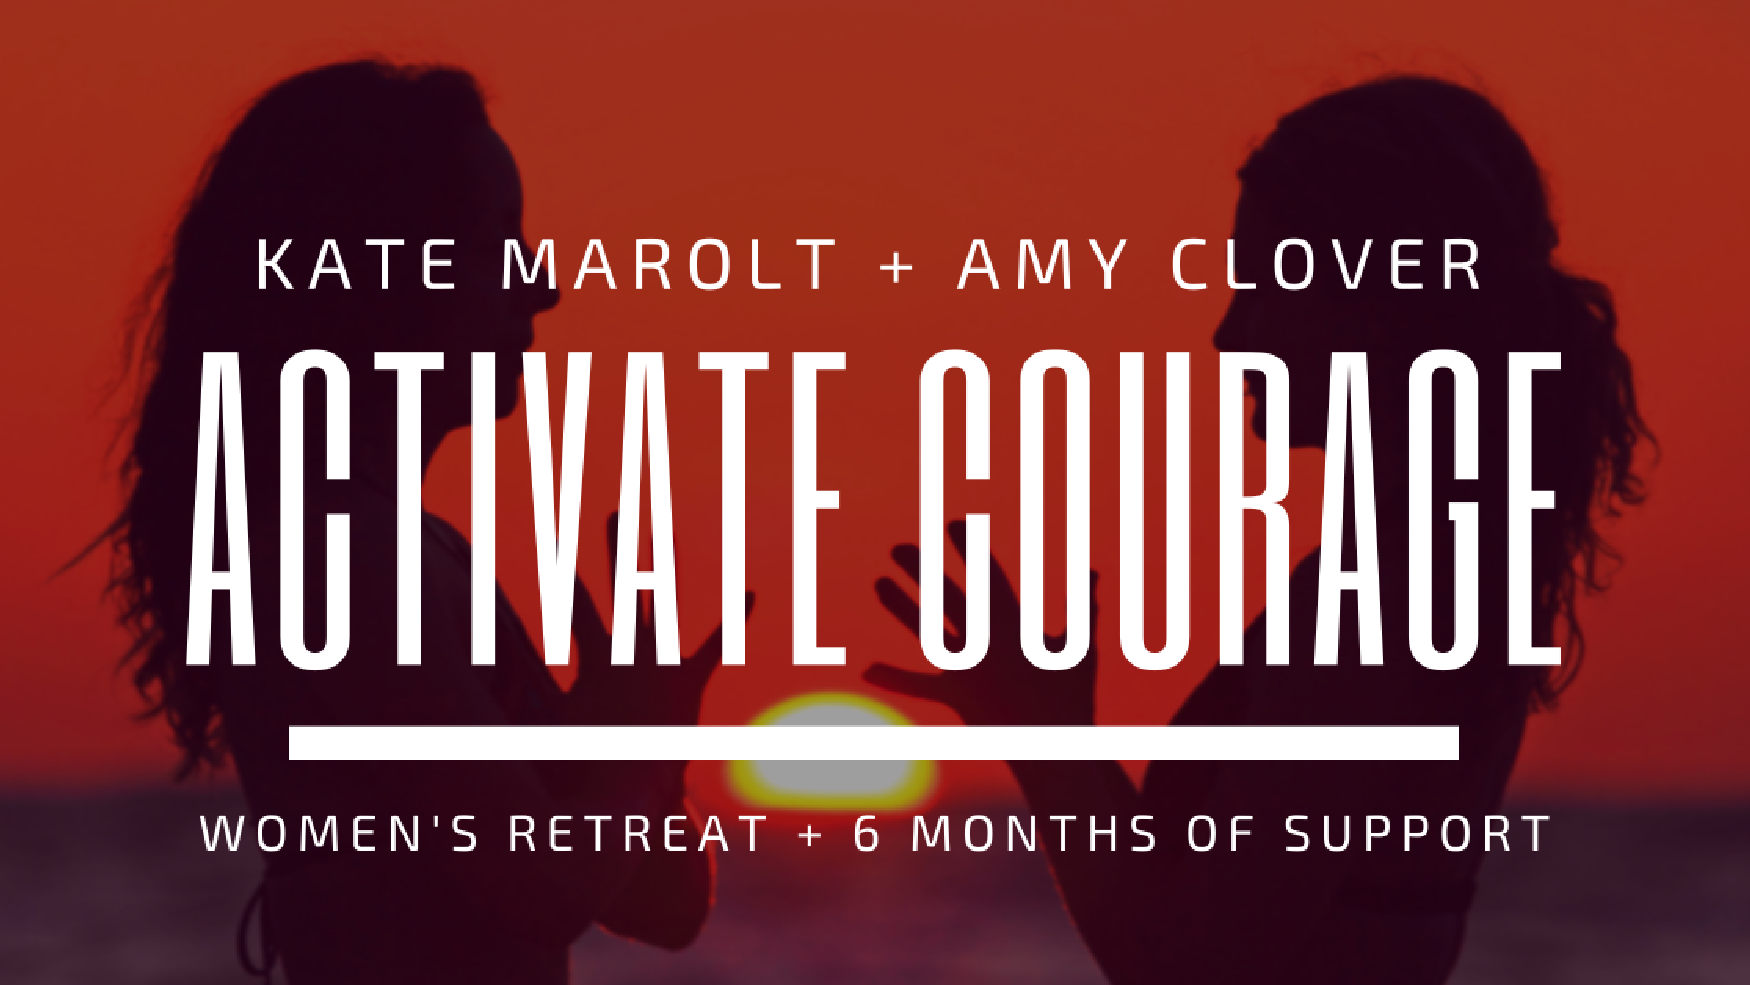 Activate Courage with Kate Marolt and Amy Clover